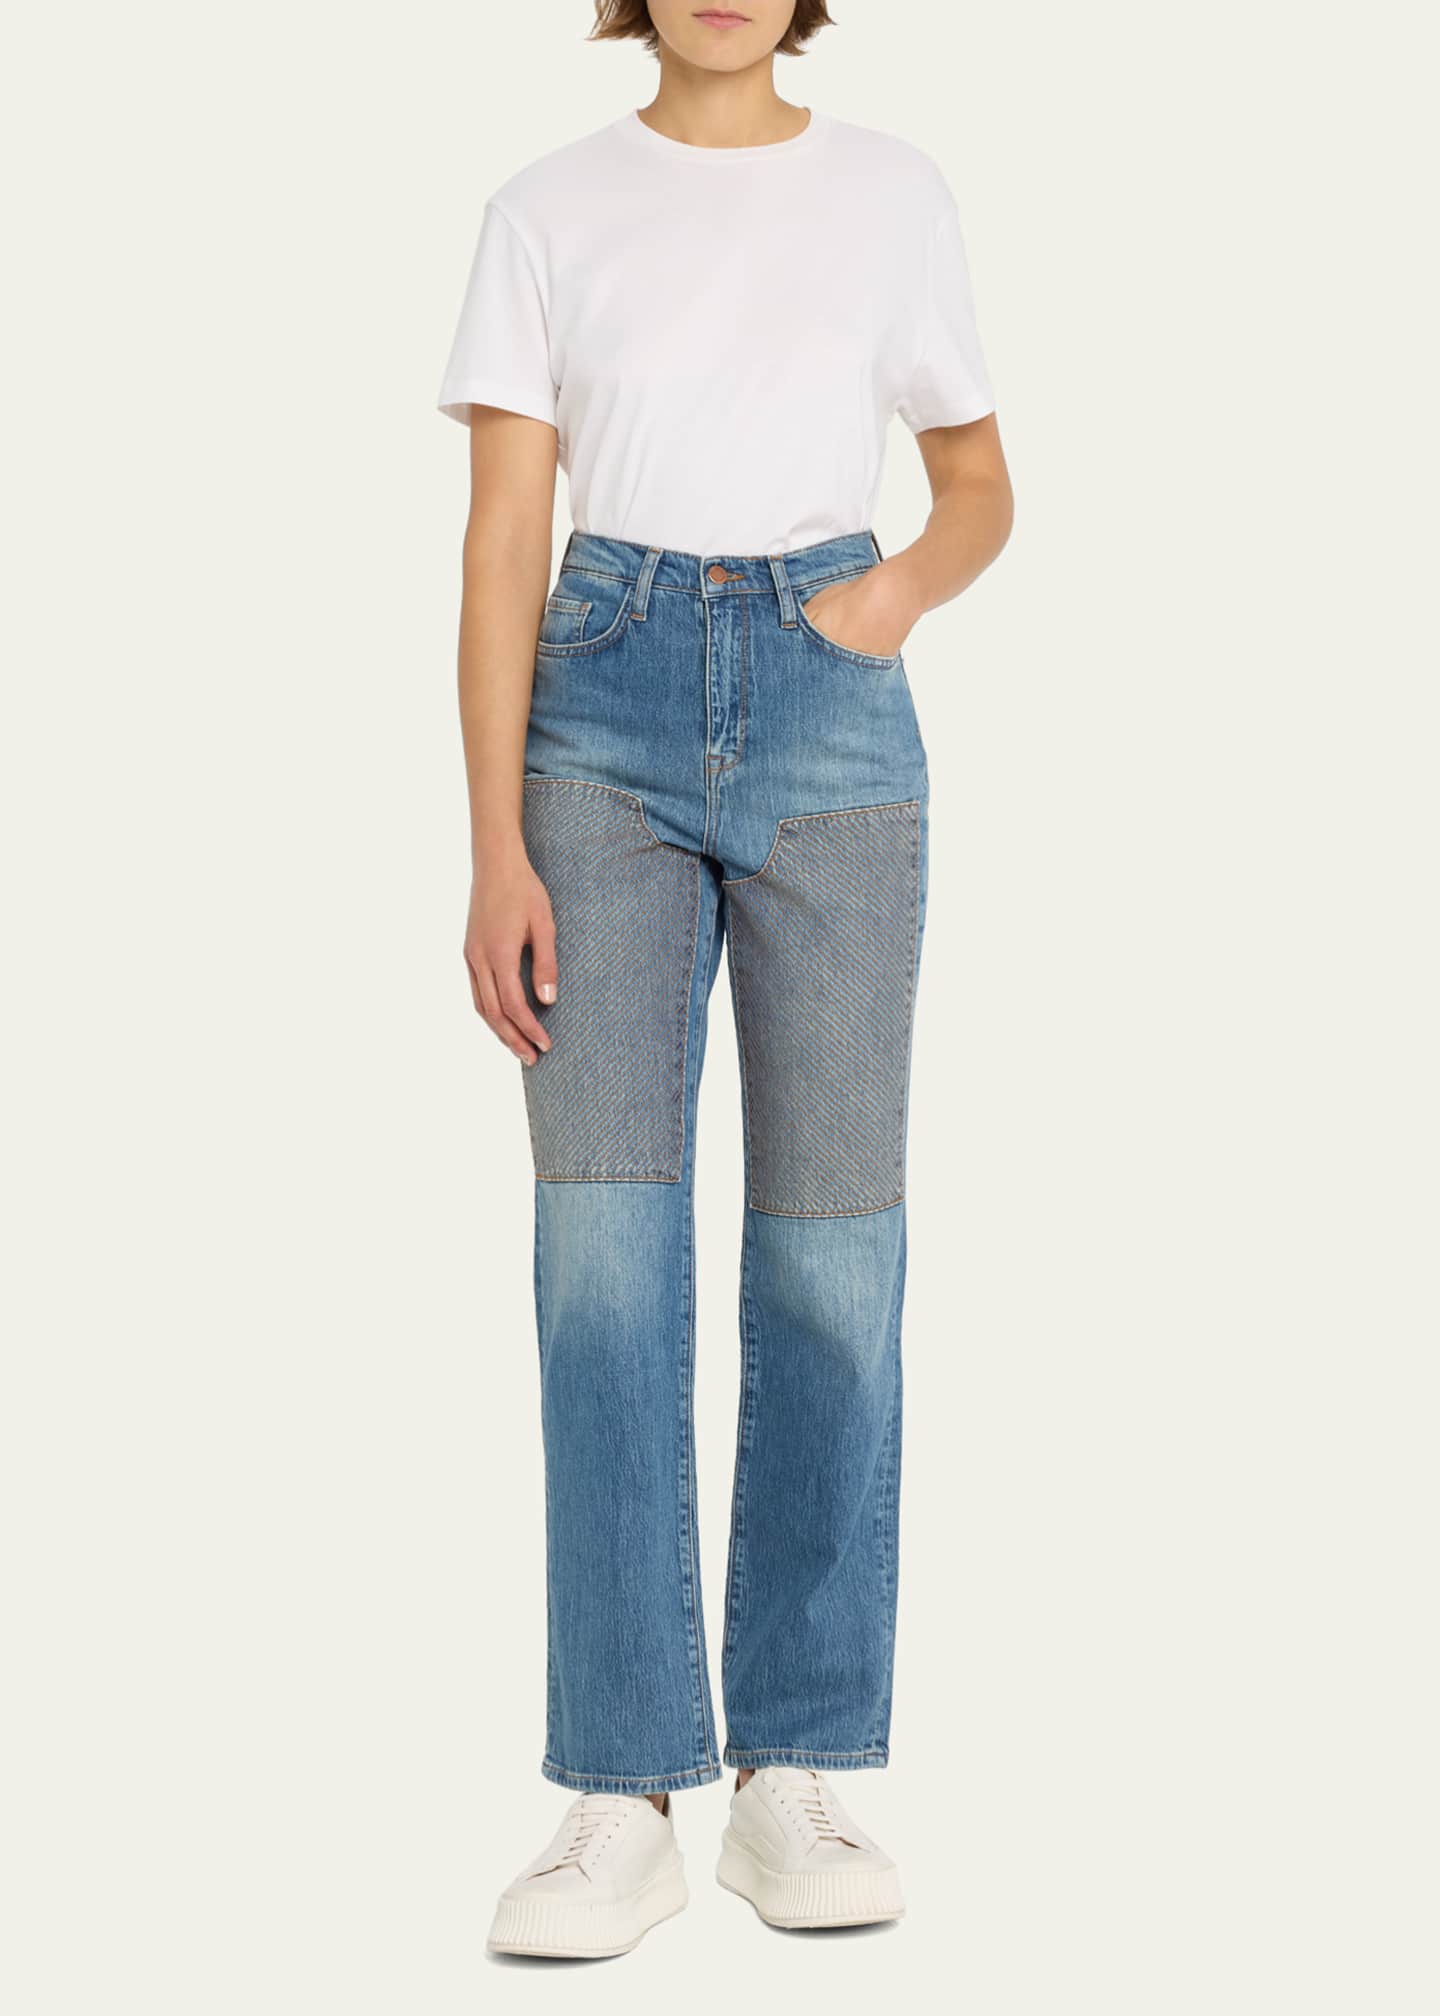 Triarchy Ms. Triarchy High Rise Straight-Leg Patch Jeans - Bergdorf Goodman